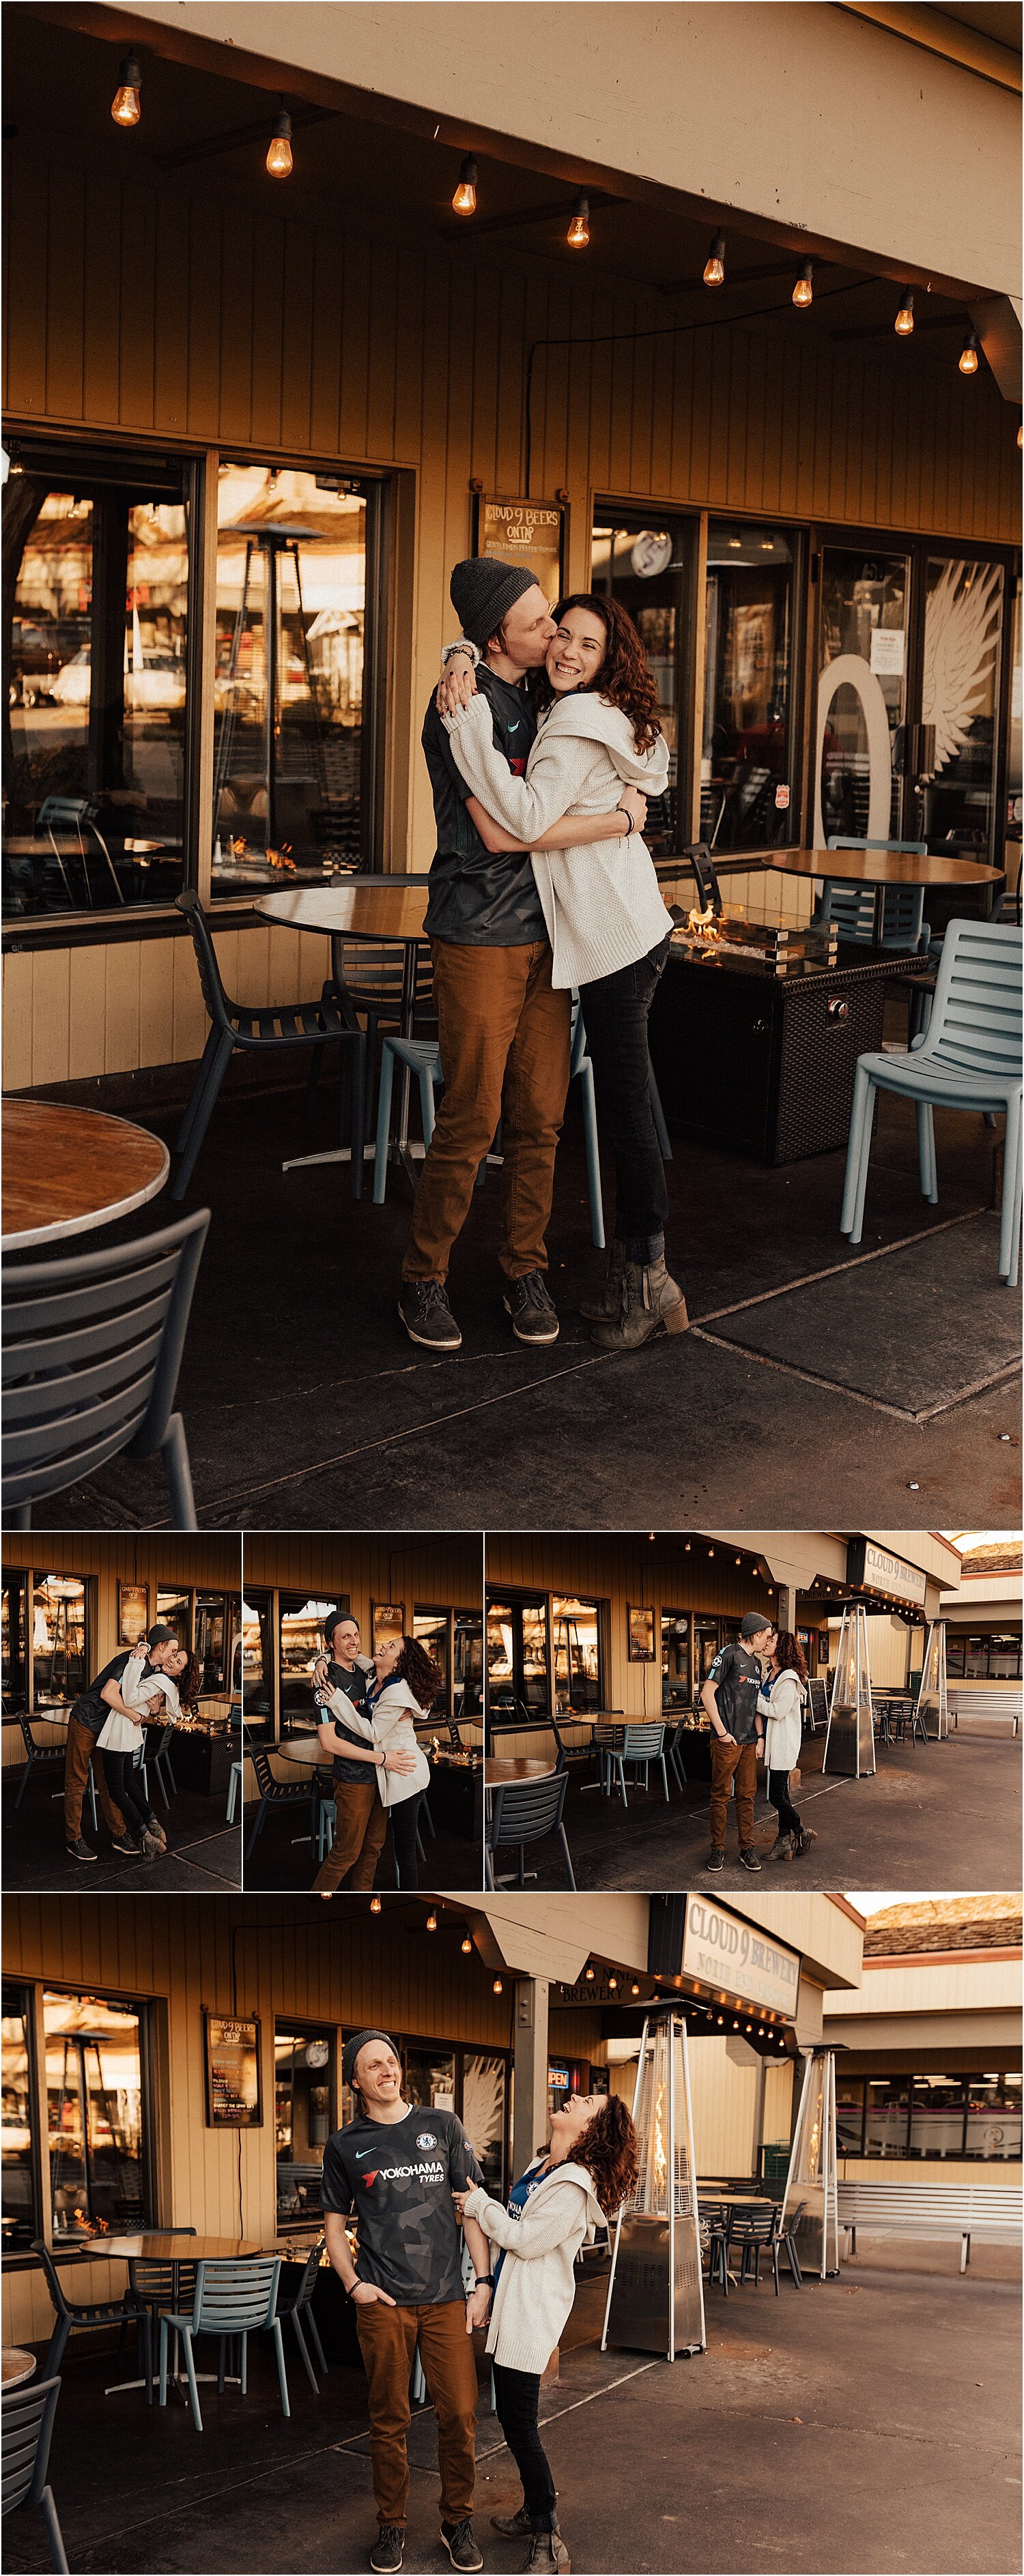 brewery foothills winter engagement session boise idaho2.jpg